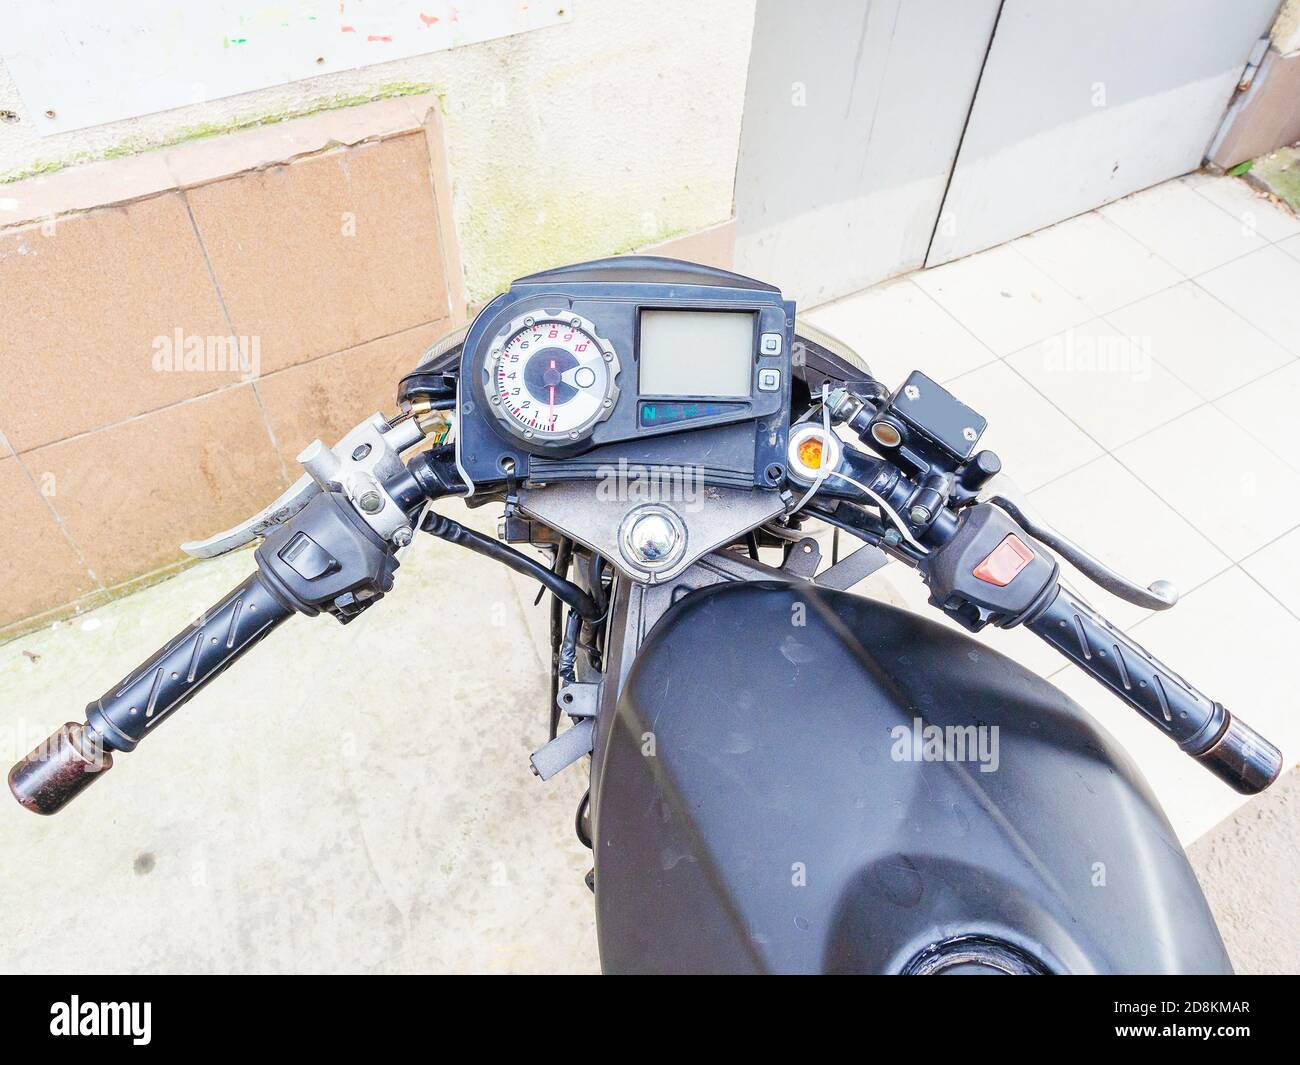 Black motorcycle steering wheel with round speedometer and screen Stock Photo